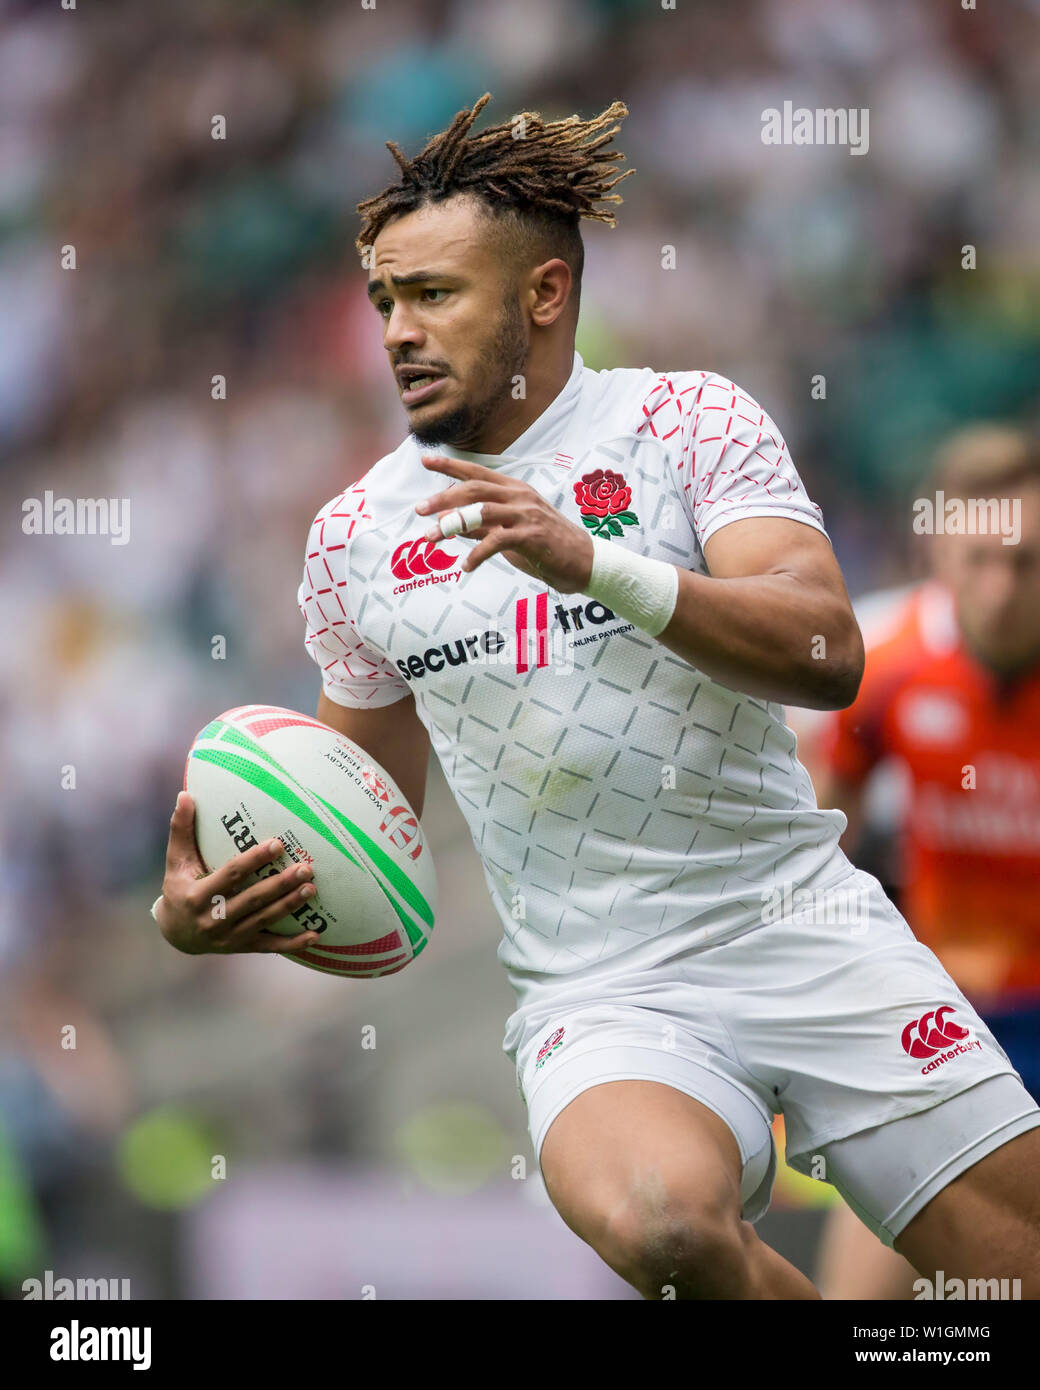 26 May 2019, Great Britain, London: The penultimate tournament of the HSBC World Rugby Sevens Series on 25 and 26 May 2019 in London (GB). Femi Sofolarin (England, 13). Photo: Jürgen Kessler/dpa Stock Photo